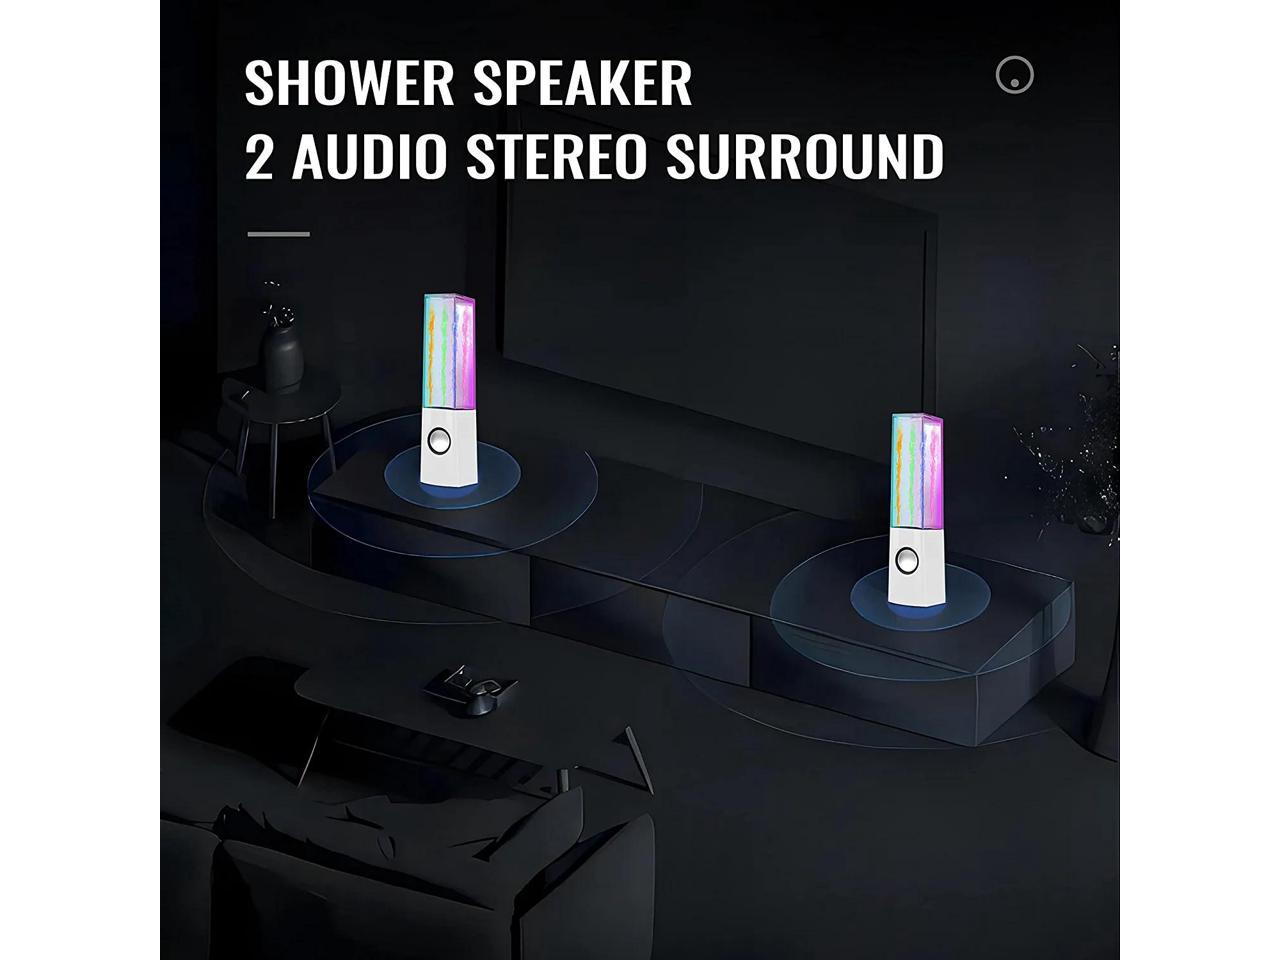 Aoboo Led Color Computer Water Speakers with Light, USB Dancing Fountain